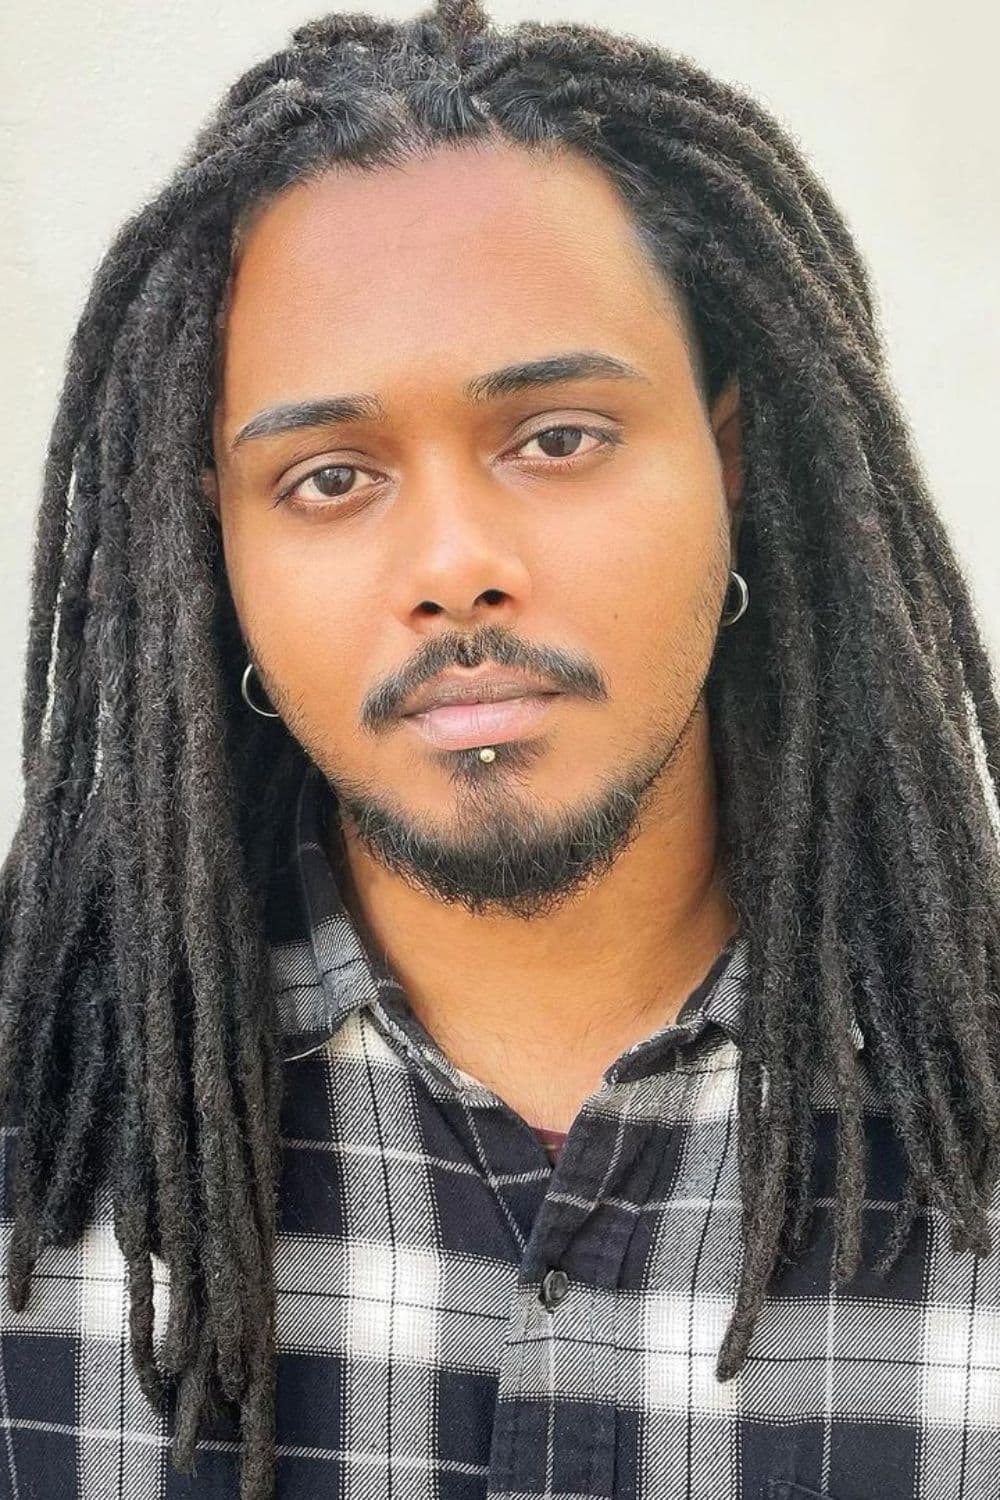 A man with long dreads.